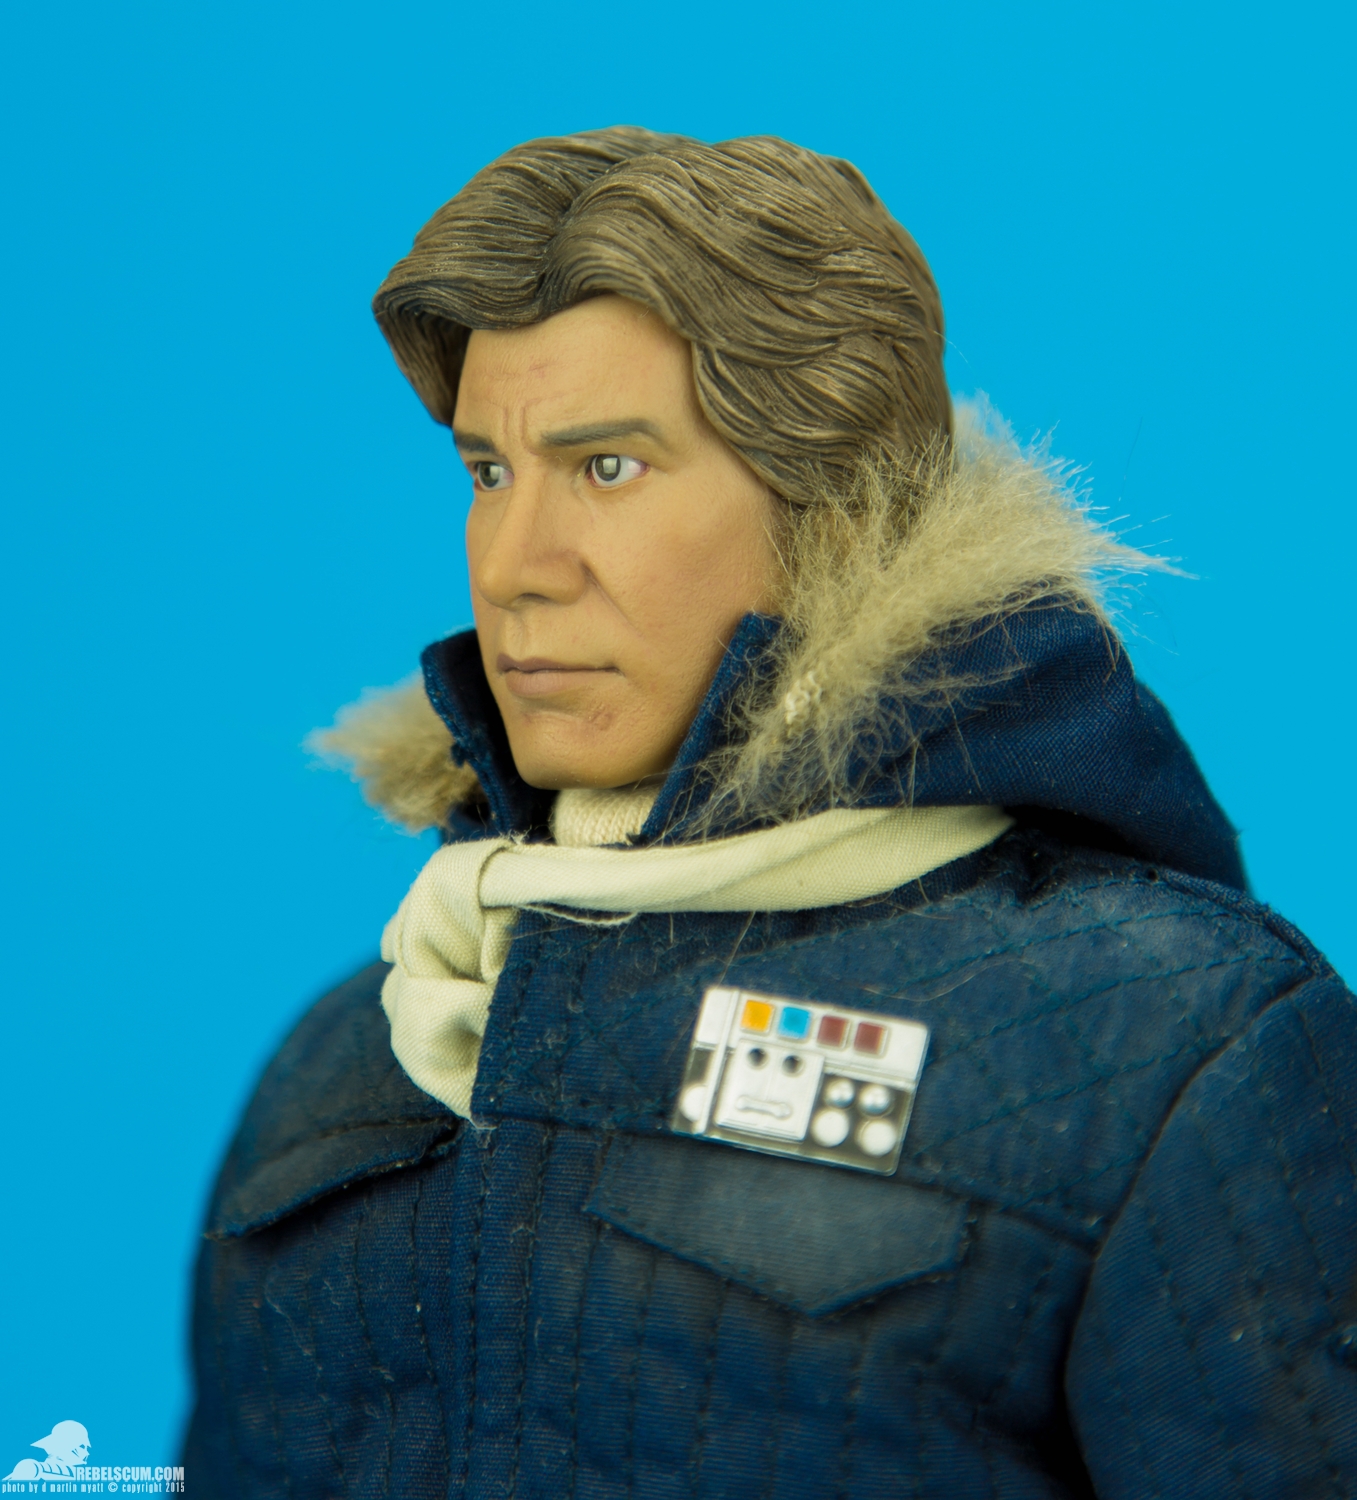 Han-Solo-Hoth-Blue-Sixth-Scale-Sideshow-Collectibles-Star-Wars-011.jpg